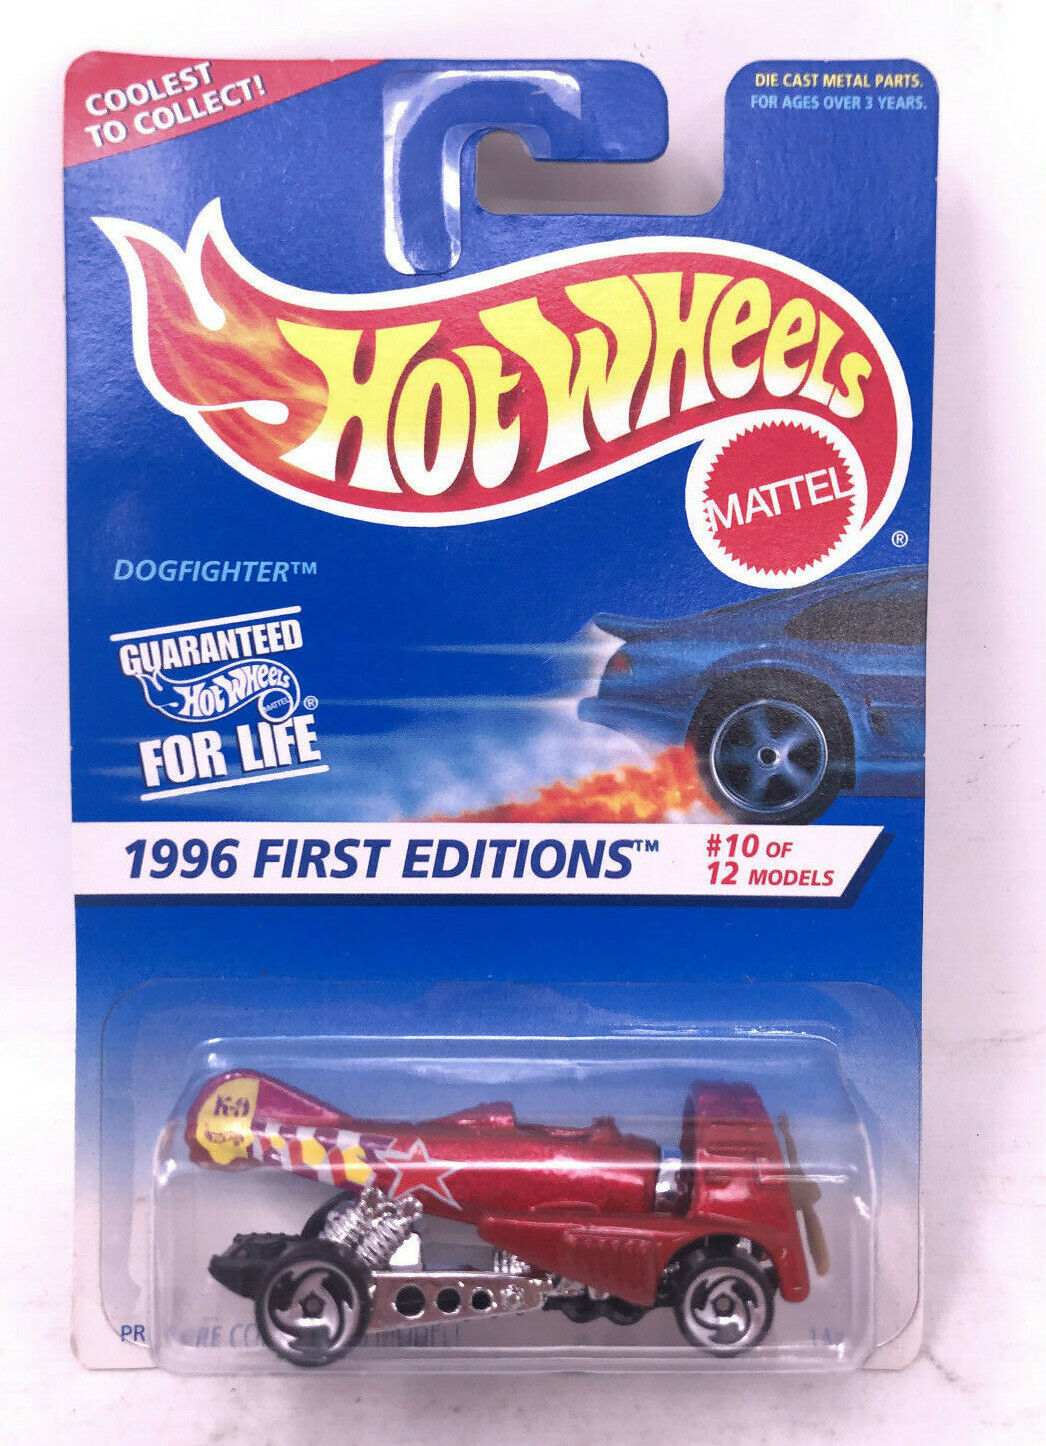 Primary image for Hot Wheels Dogfighter 1996 First Edition 10 of 12 Razor Wheels